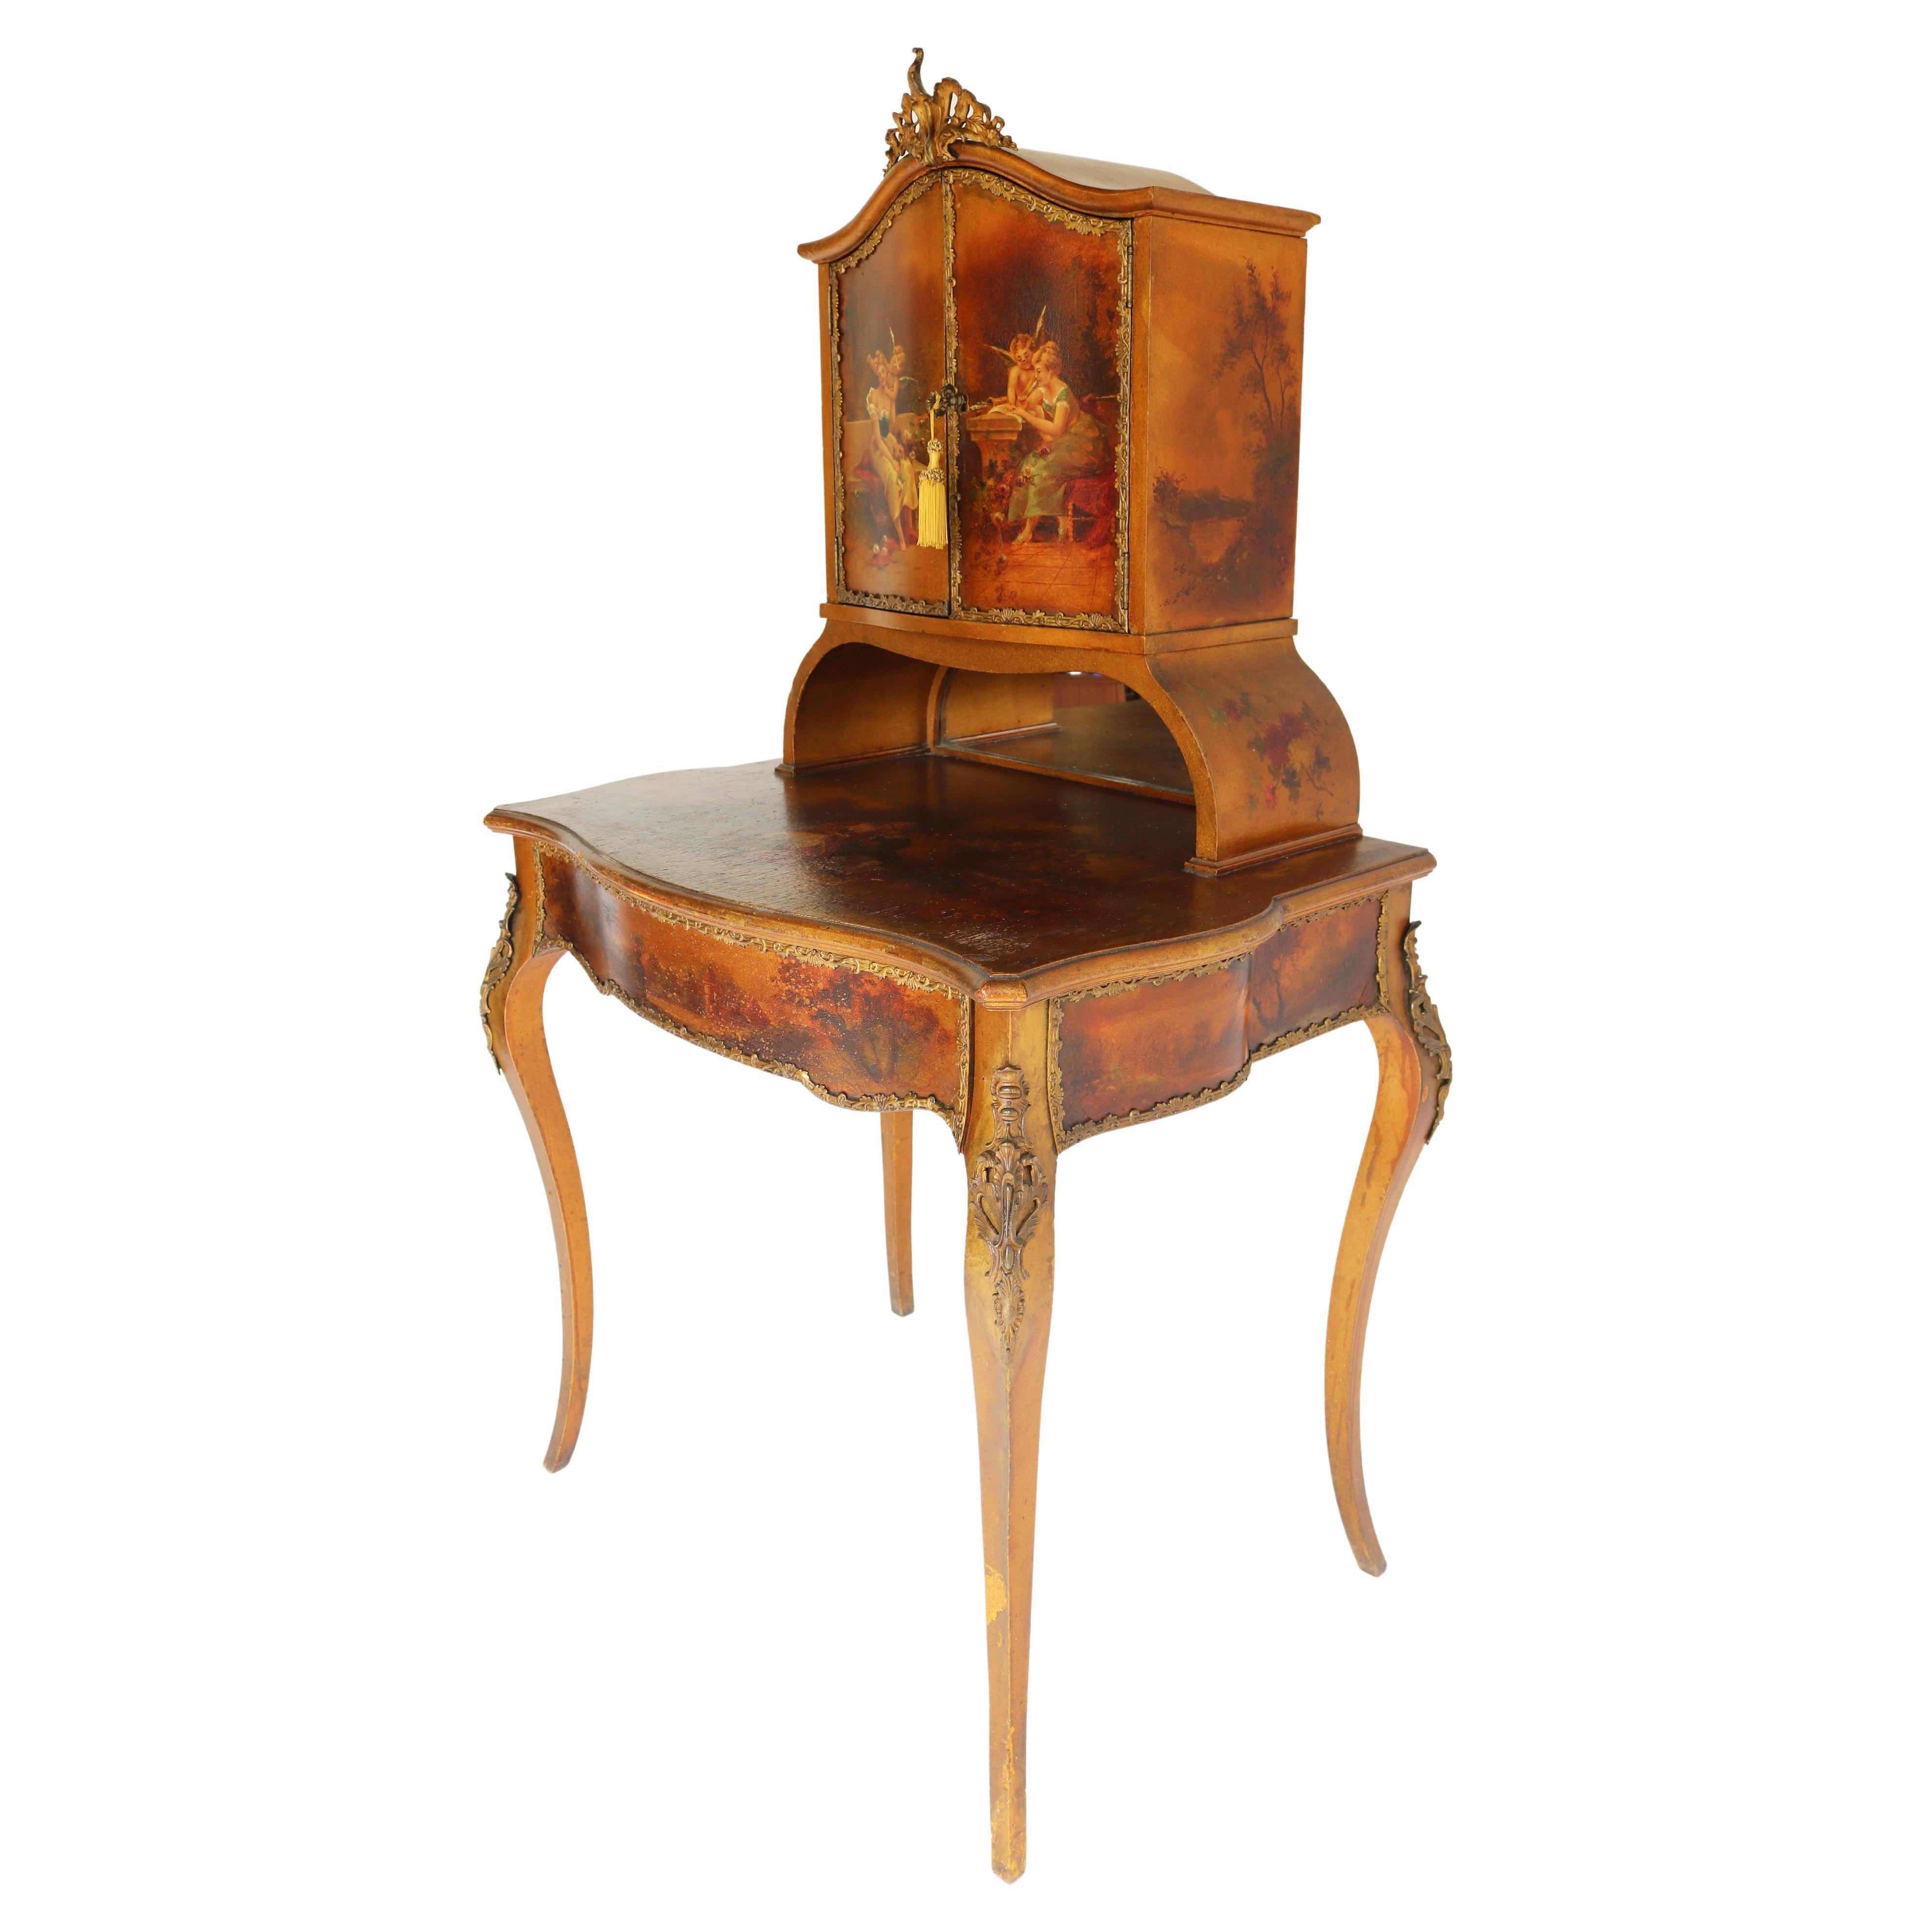 Italian Renaissance Dressing Table 19th Century Hand Painted by Müller Morten